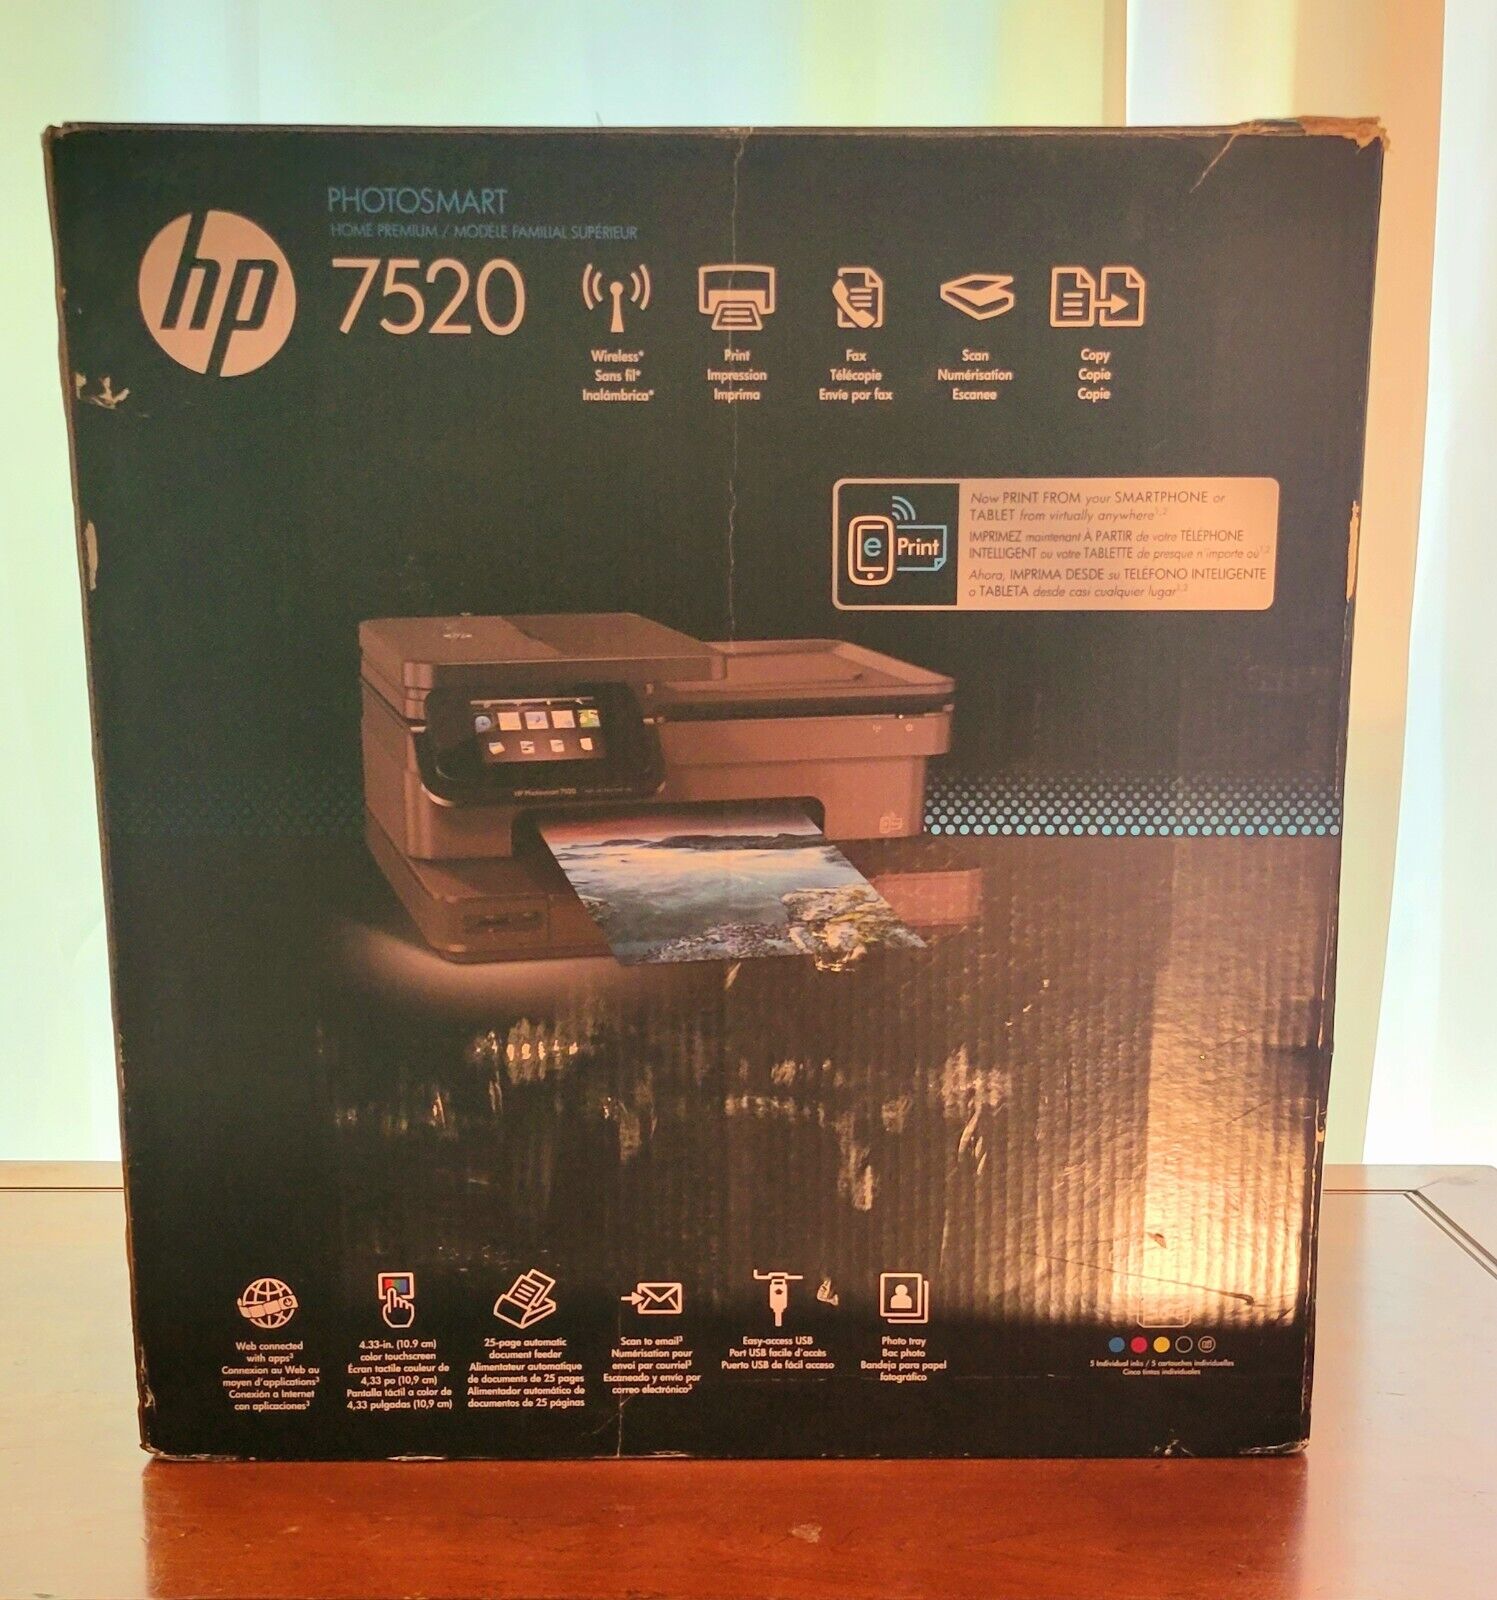 HP Photosmart 7520 e-All-in-One Wireless Inkjet Printer - Excellent Condition